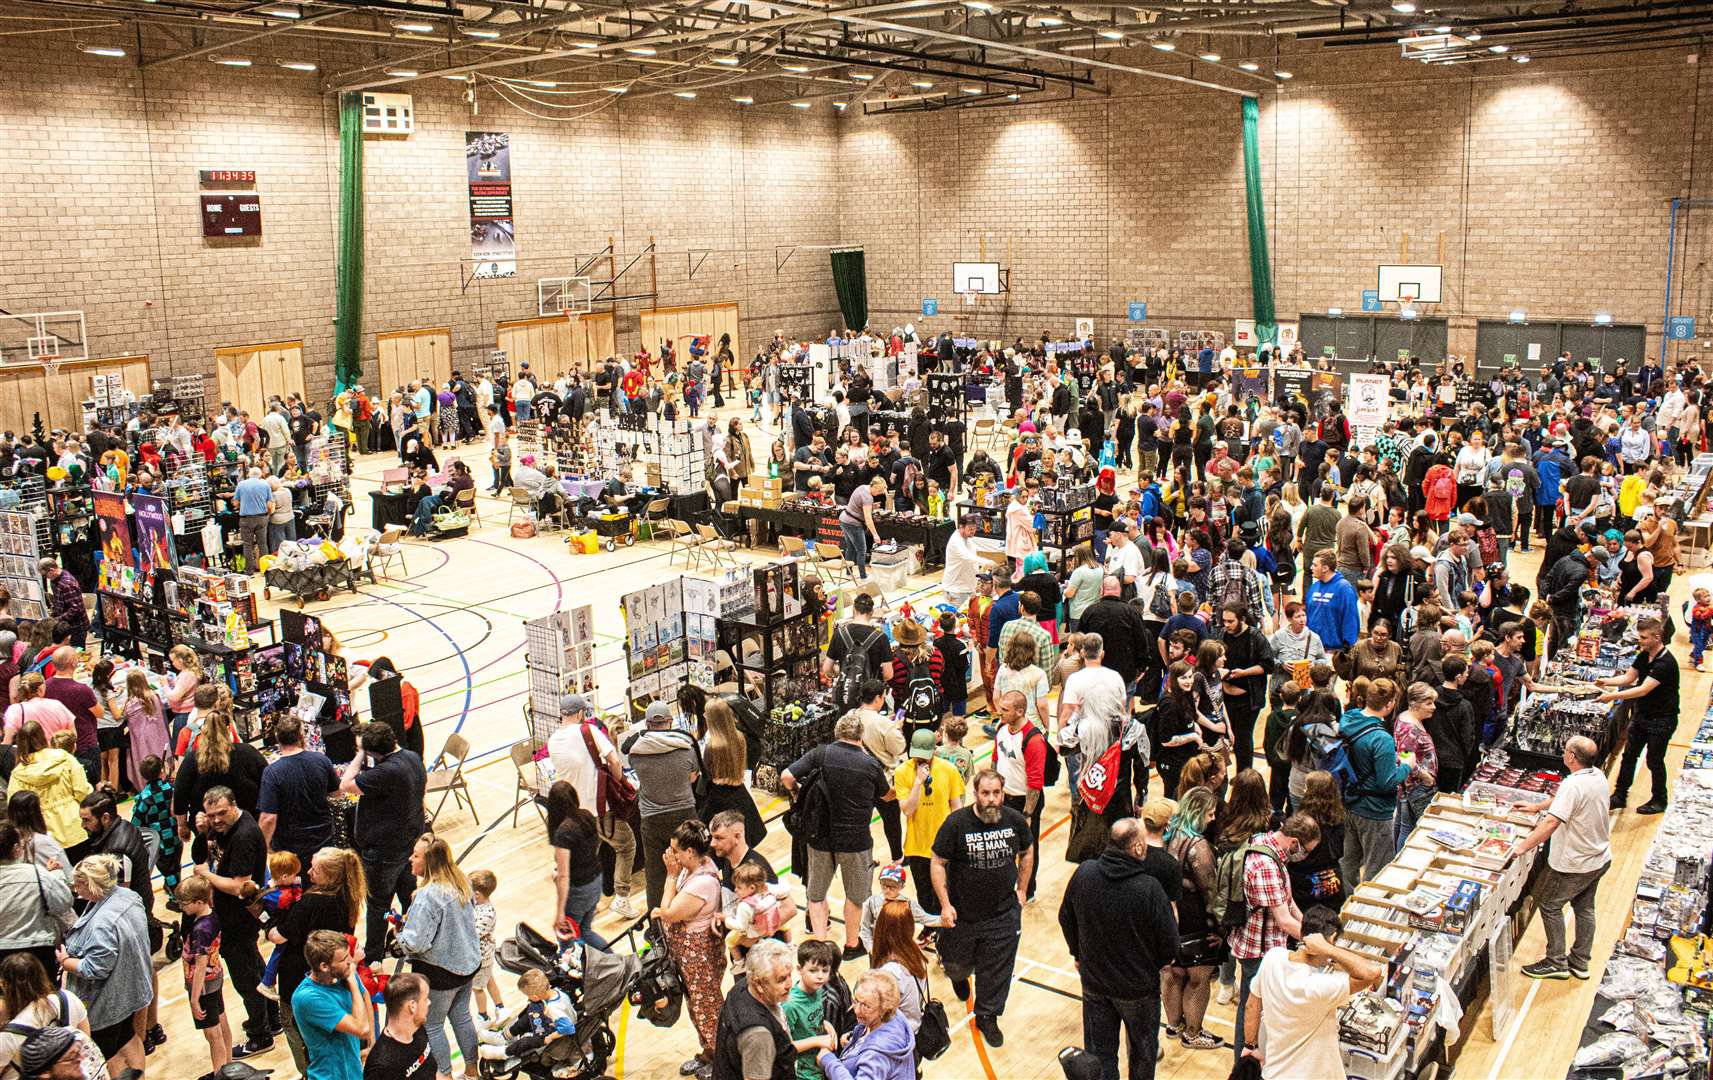 Doors opened at 10am on Saturday as thousands filled the venue for ComiCon. Photo: Niall Harkiss